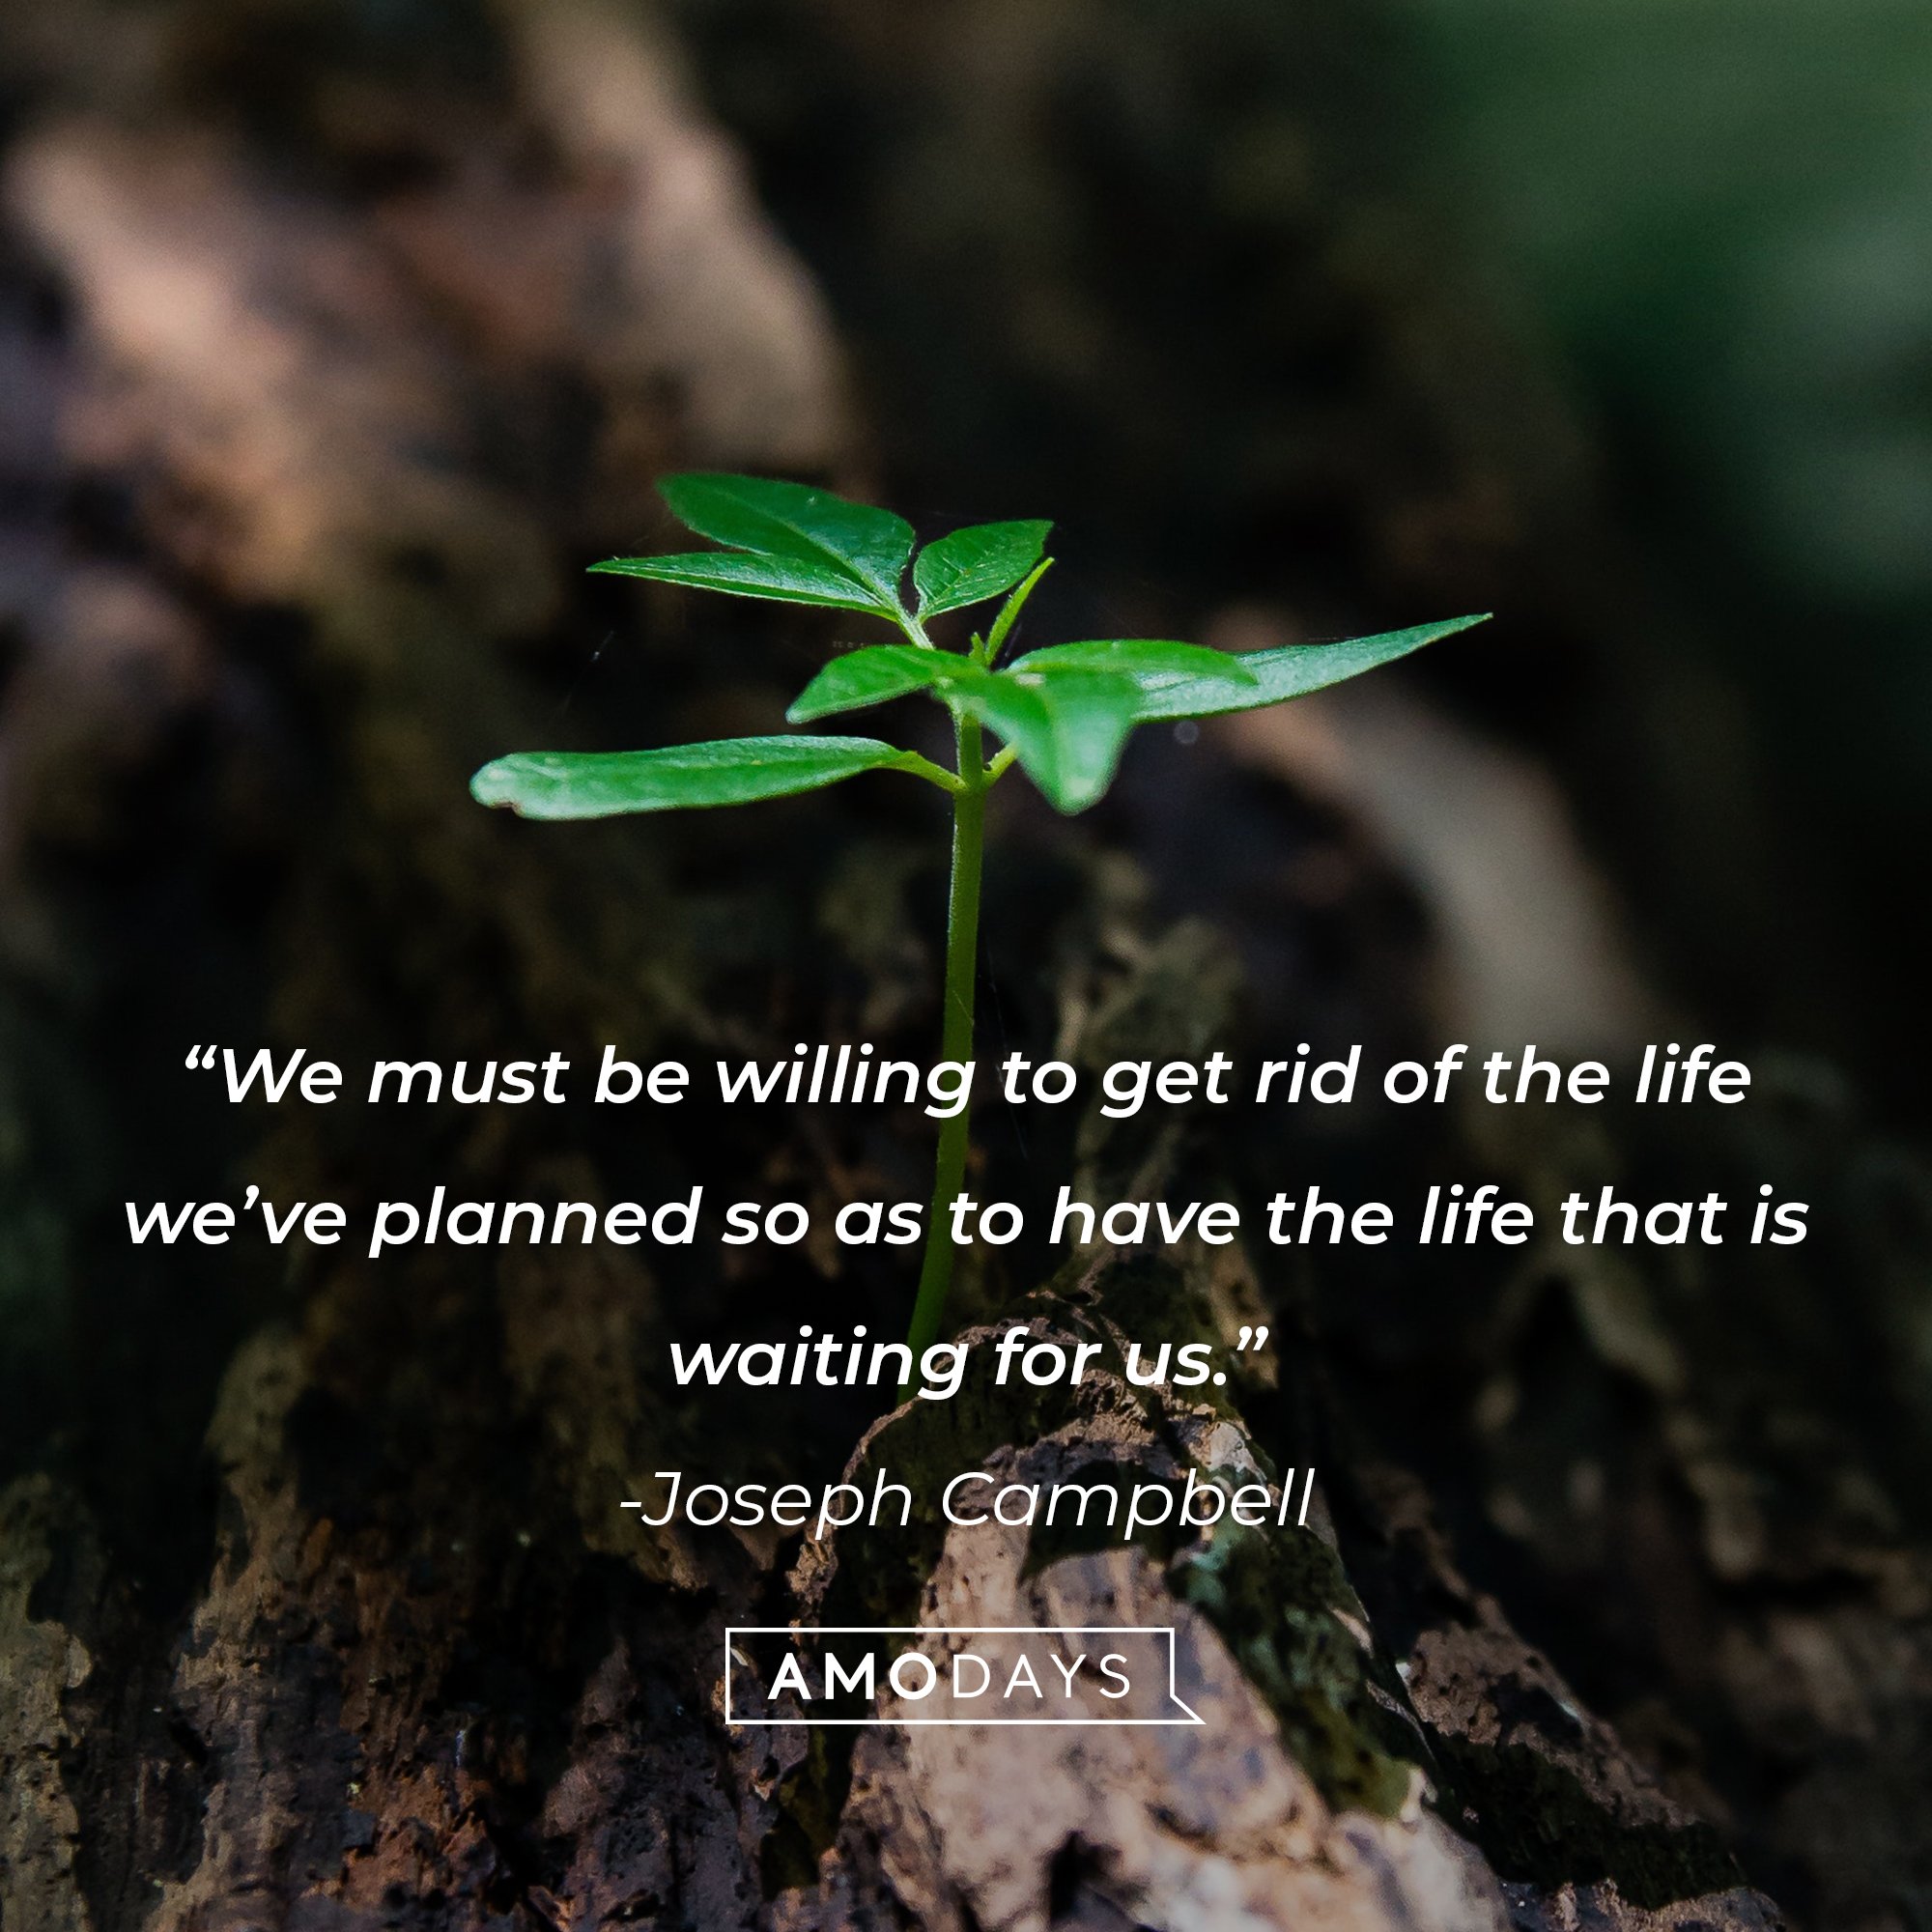 Joseph Campbell's quote: “We must be willing to get rid of the life we’ve planned so as to have the life that is waiting for us.” | Image: AmoDays